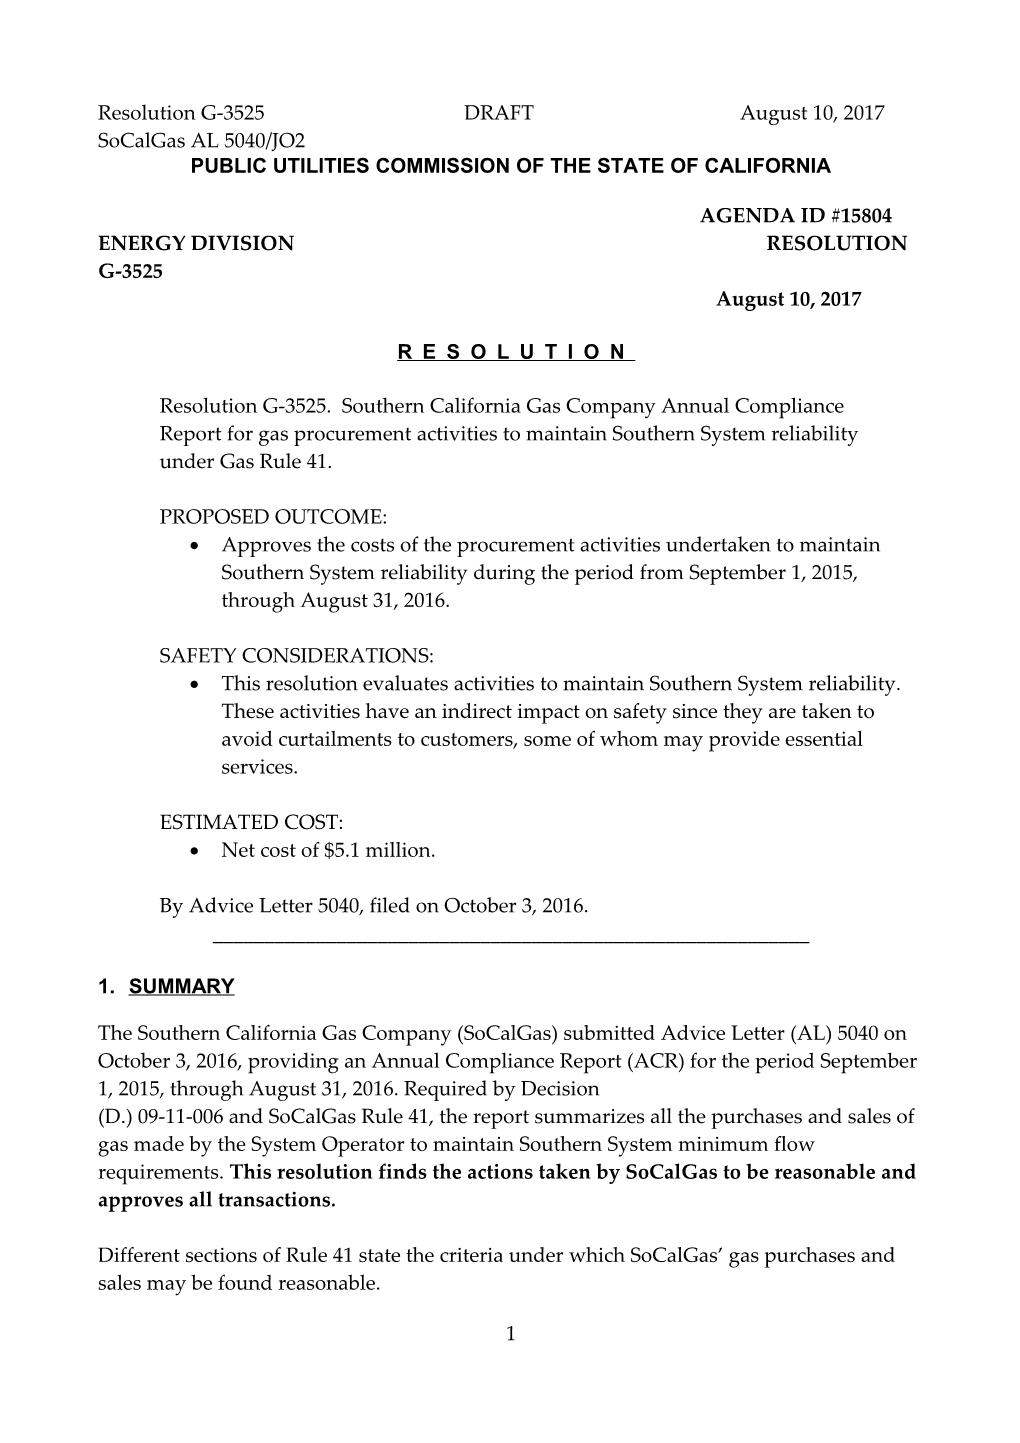 Public Utilities Commission of the State of California s35